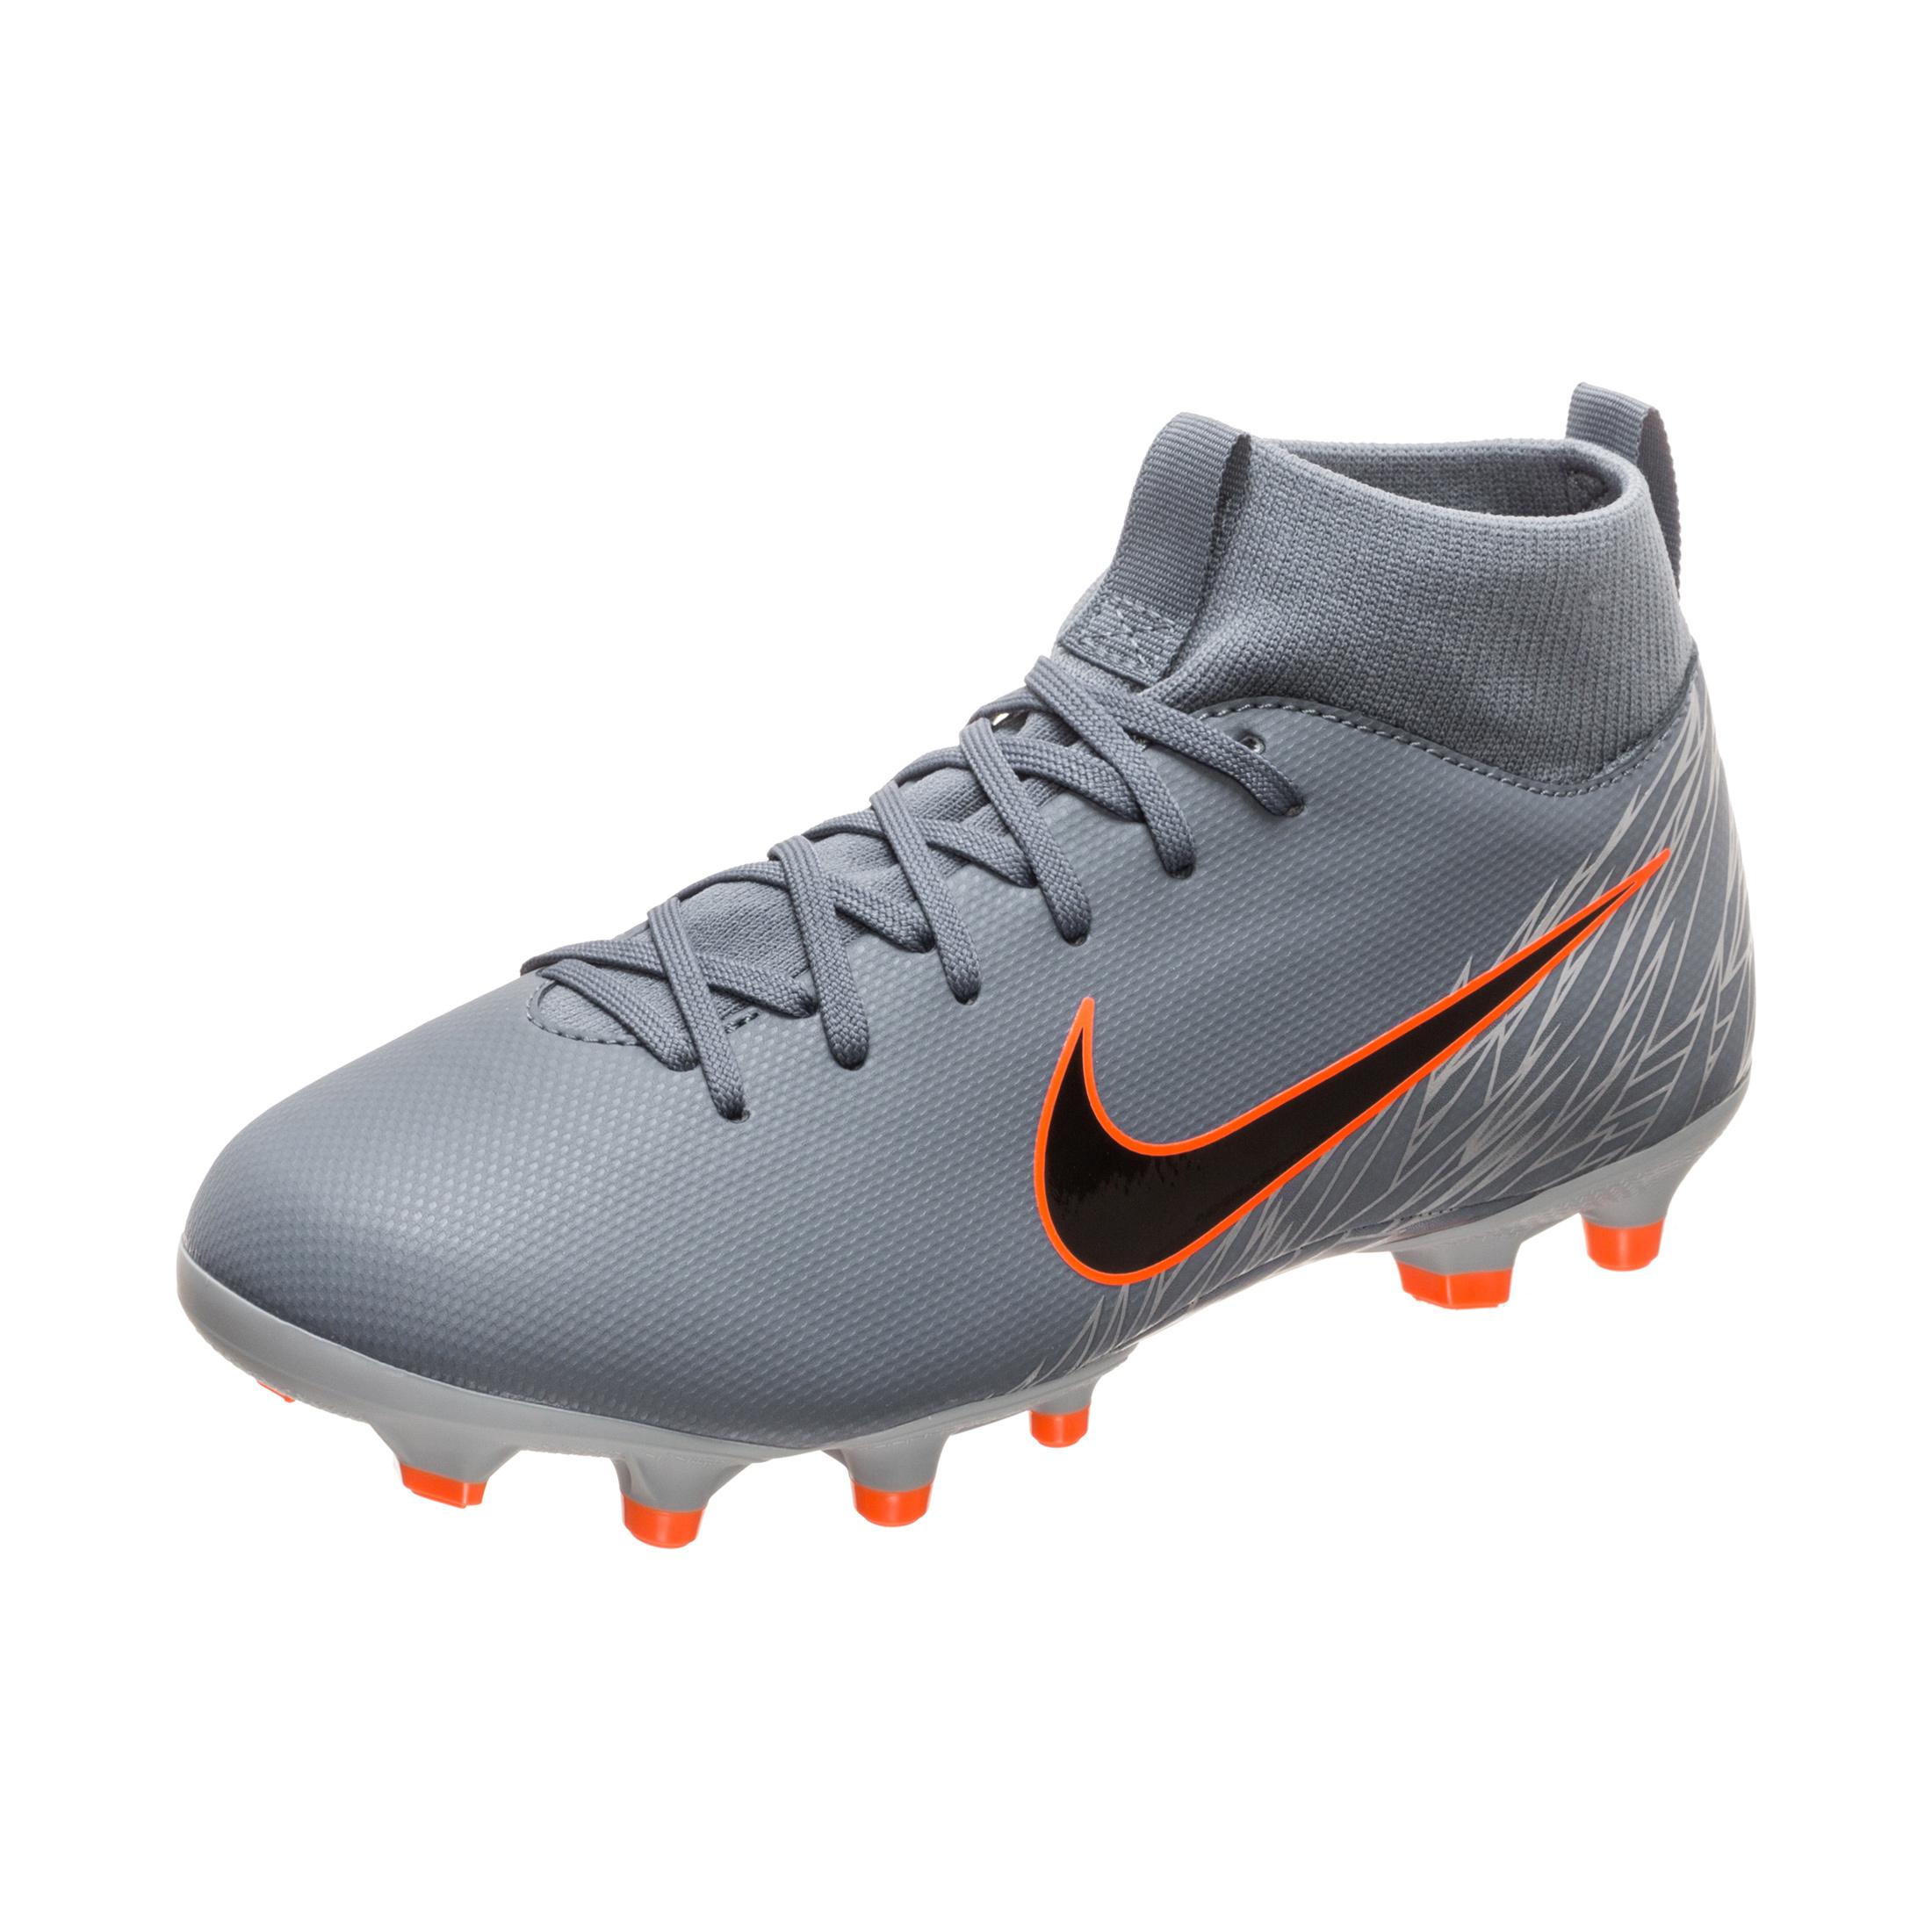 Nike Mercurial Superfly 6 Academy TF Game Over. Unisport